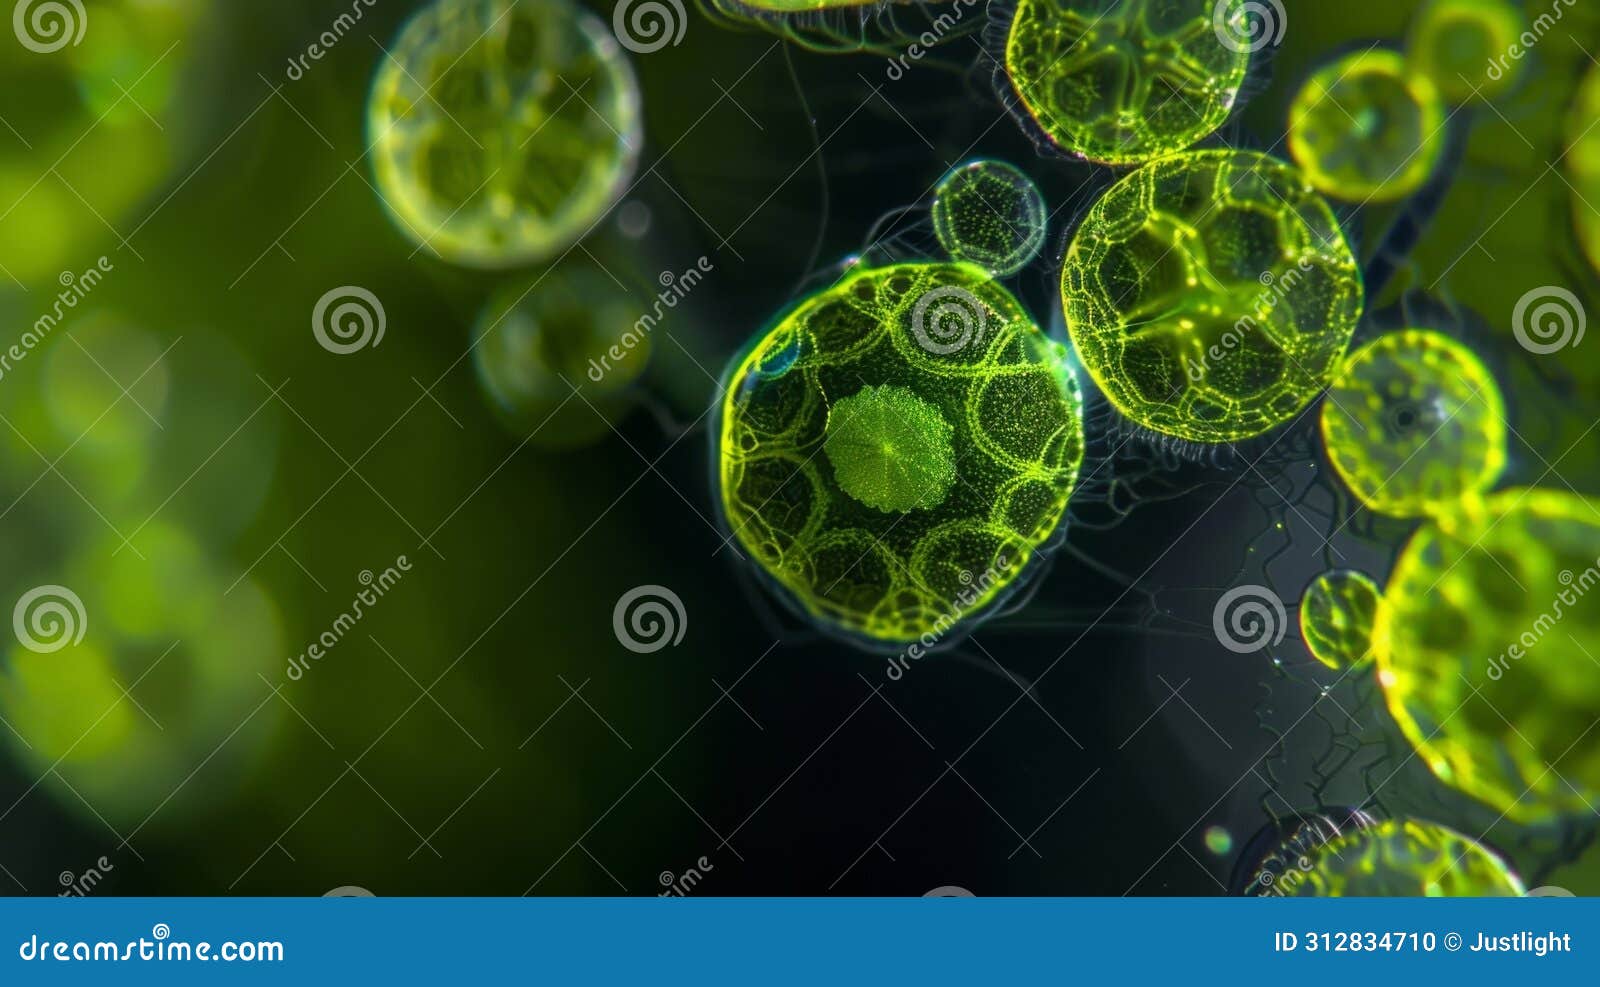 a closeup of a single algal cell with its cytoplasm filled with green chloroplasts that are actively converting light